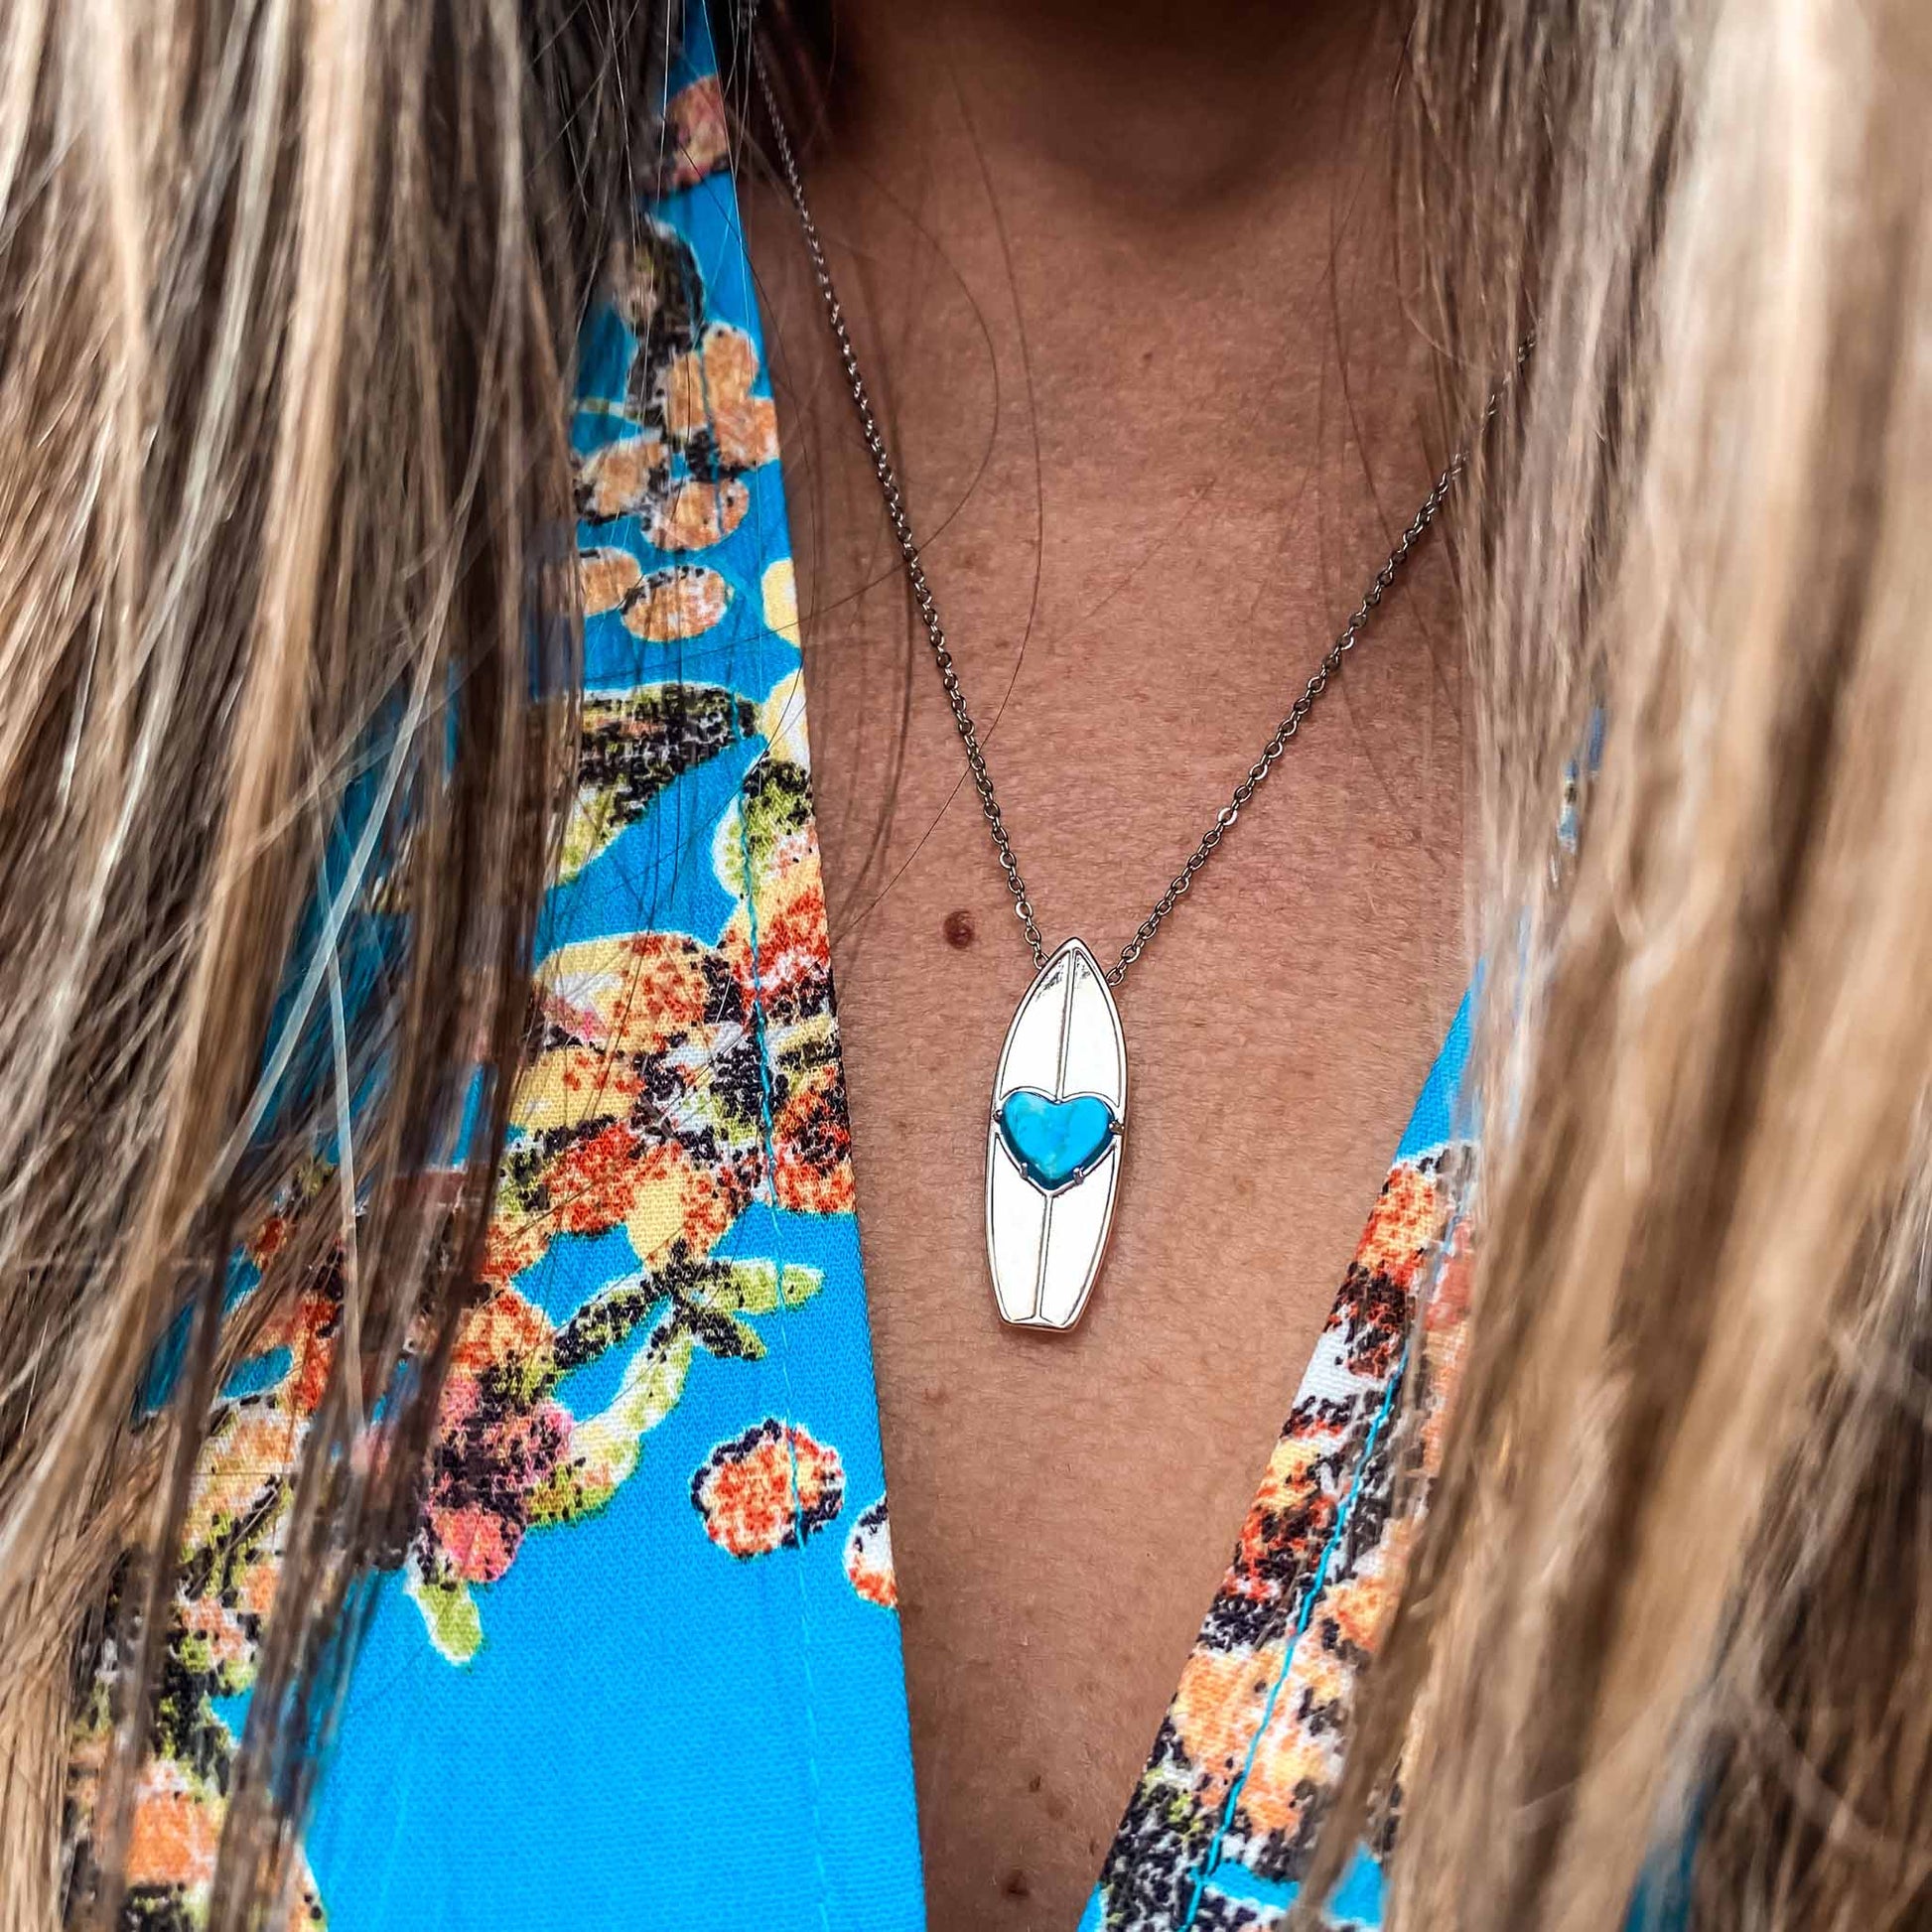 What's the surf forecast for today? While Surfline helps with the swell, wind & wave forecasts we help you show off your passion for surfing. Whether you're surfing or just checking the waves at Pipeline, take your surfboard, always. Shop the December birthstone surf jewelry online or at a surf shop near you.